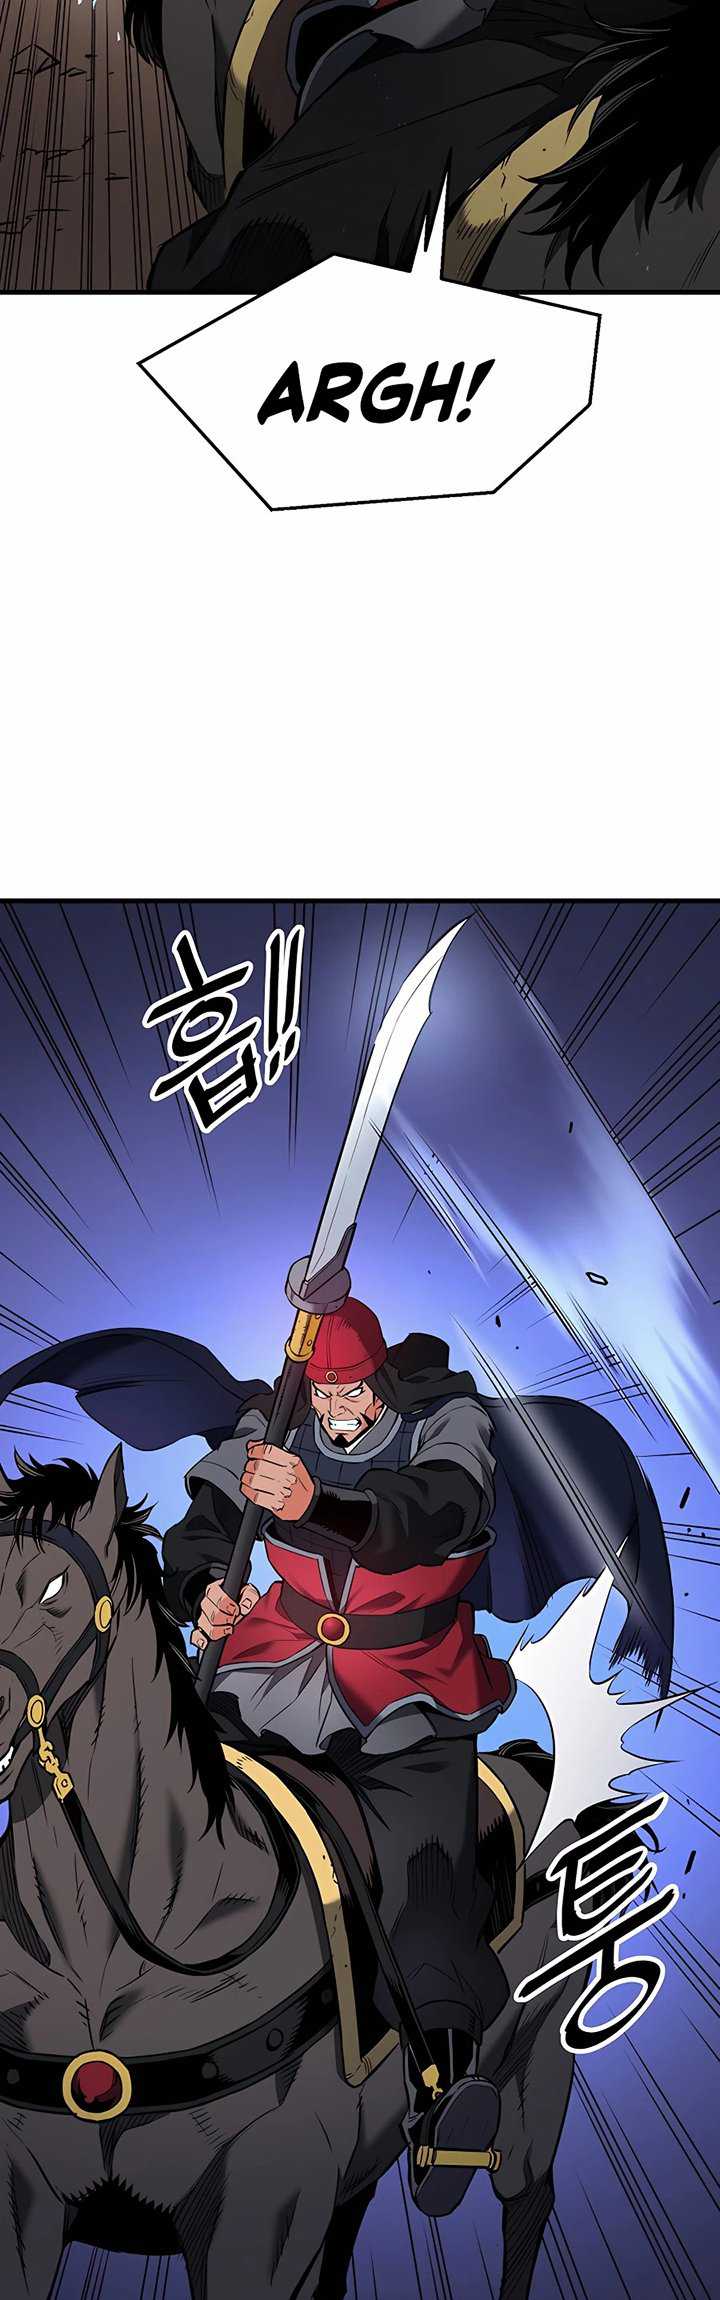 Pride Of The Blade Chapter 07